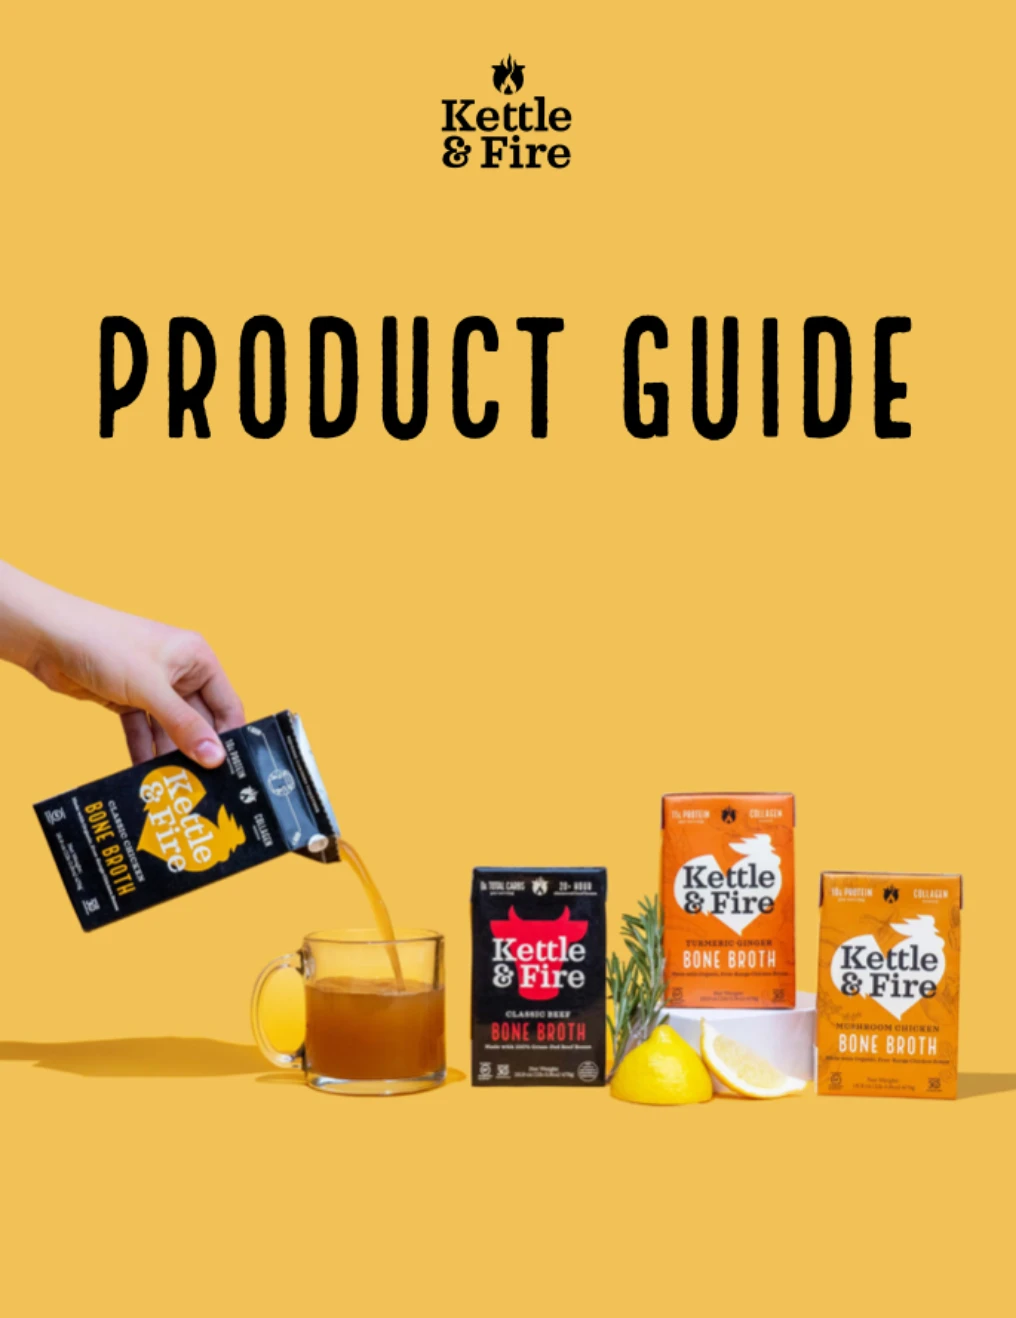 Kettle and Fire product guide design